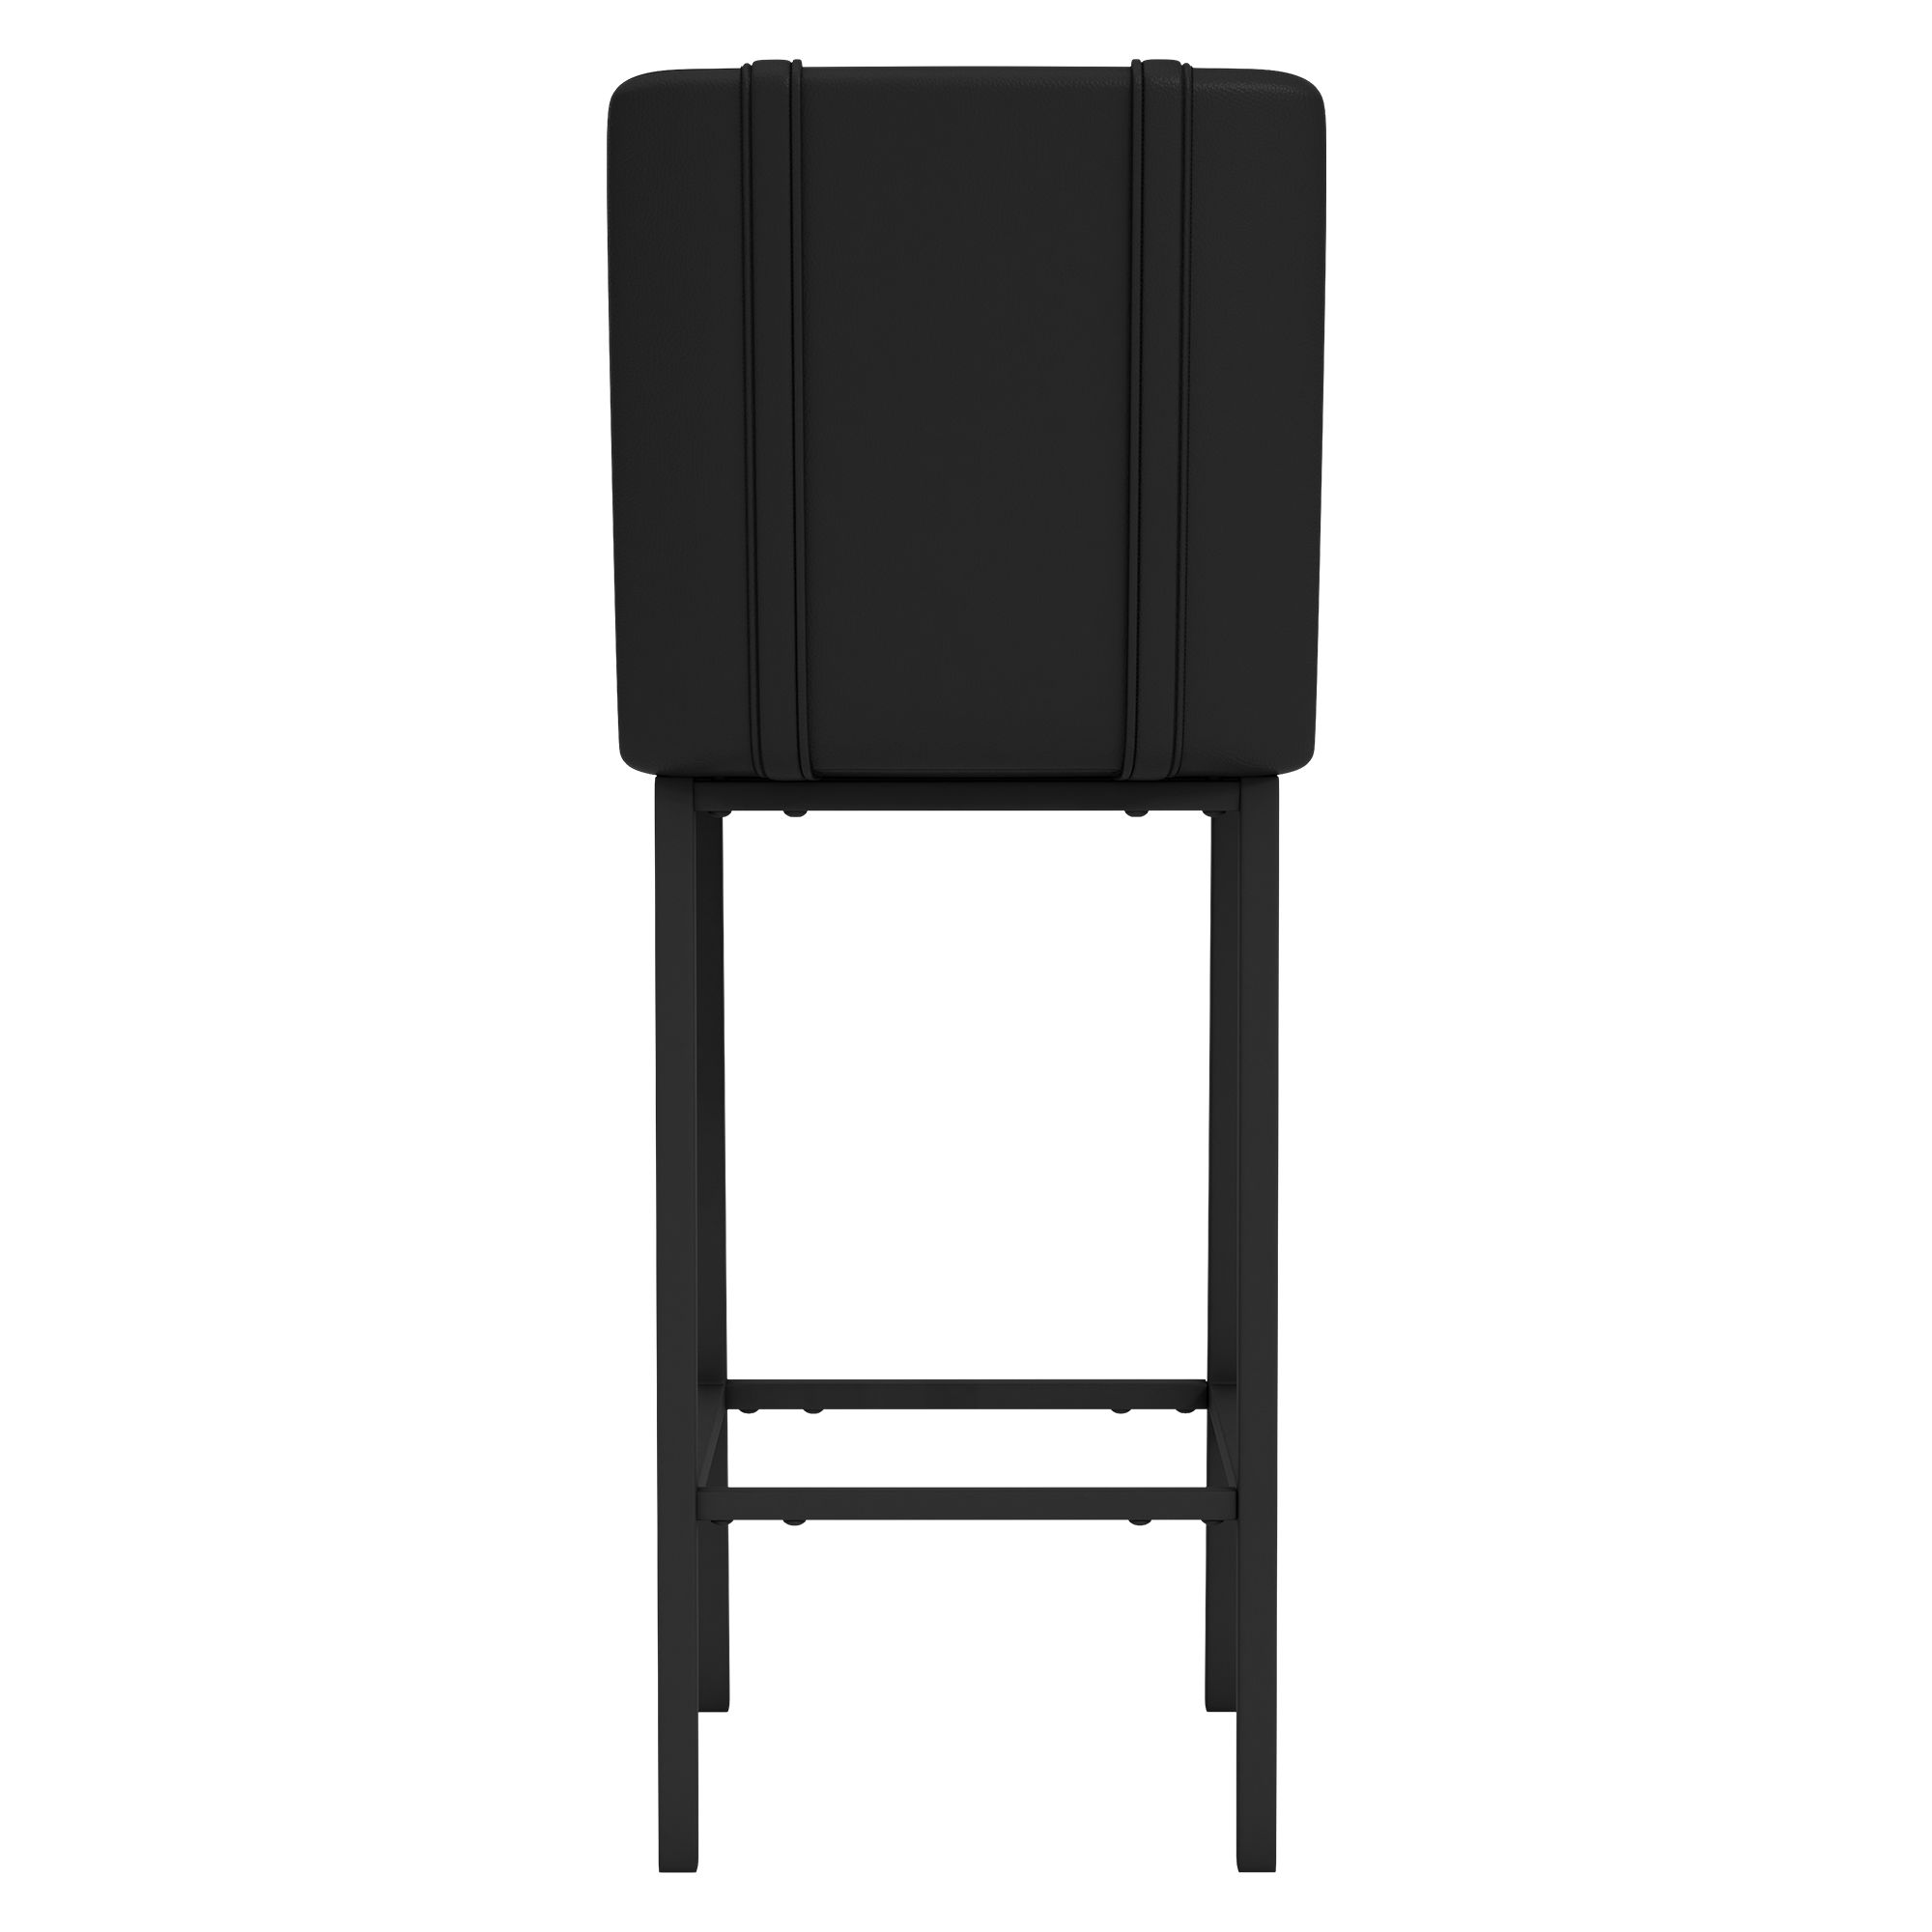 Bar Stool 500 with Philadelphia 76ers GC [CAN ONLY BE SHIPPED TO PENNSYLVANIA] Set of 2